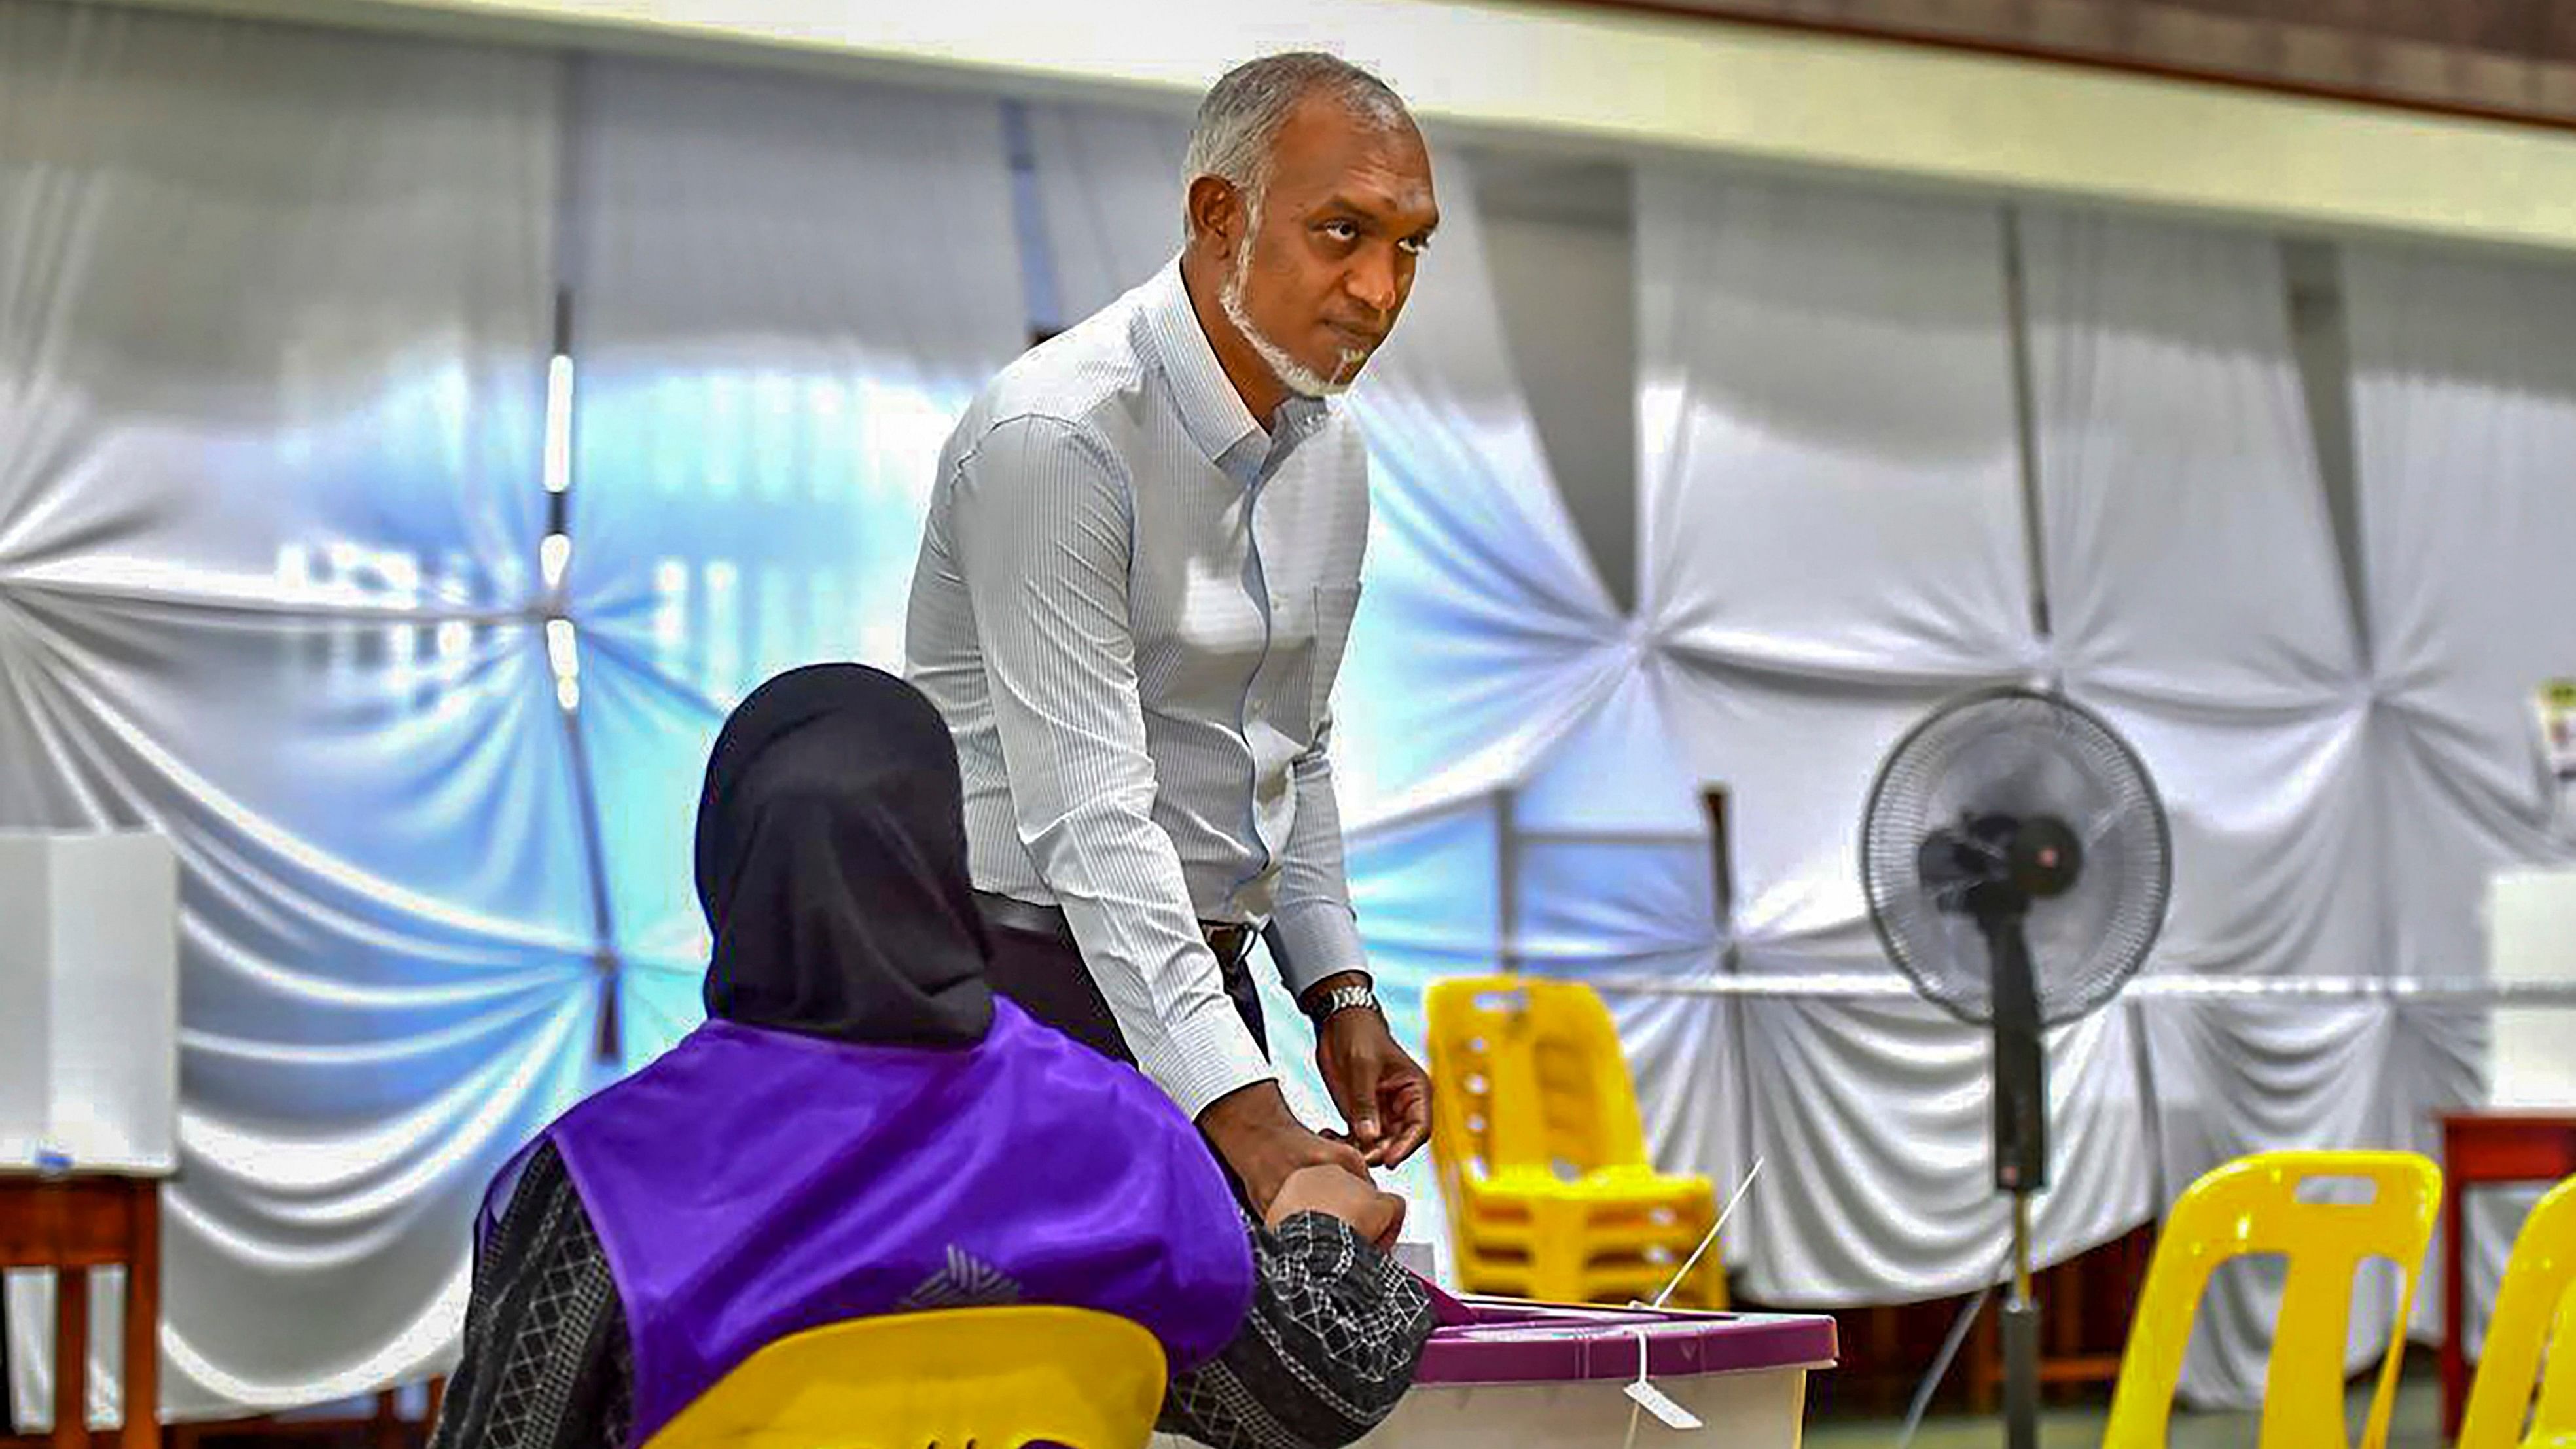 <div class="paragraphs"><p>Maldives President Mohamed Muizzu arrives to cast his ballot for parliamentary election at a polling station in Mali, Maldives.</p></div>